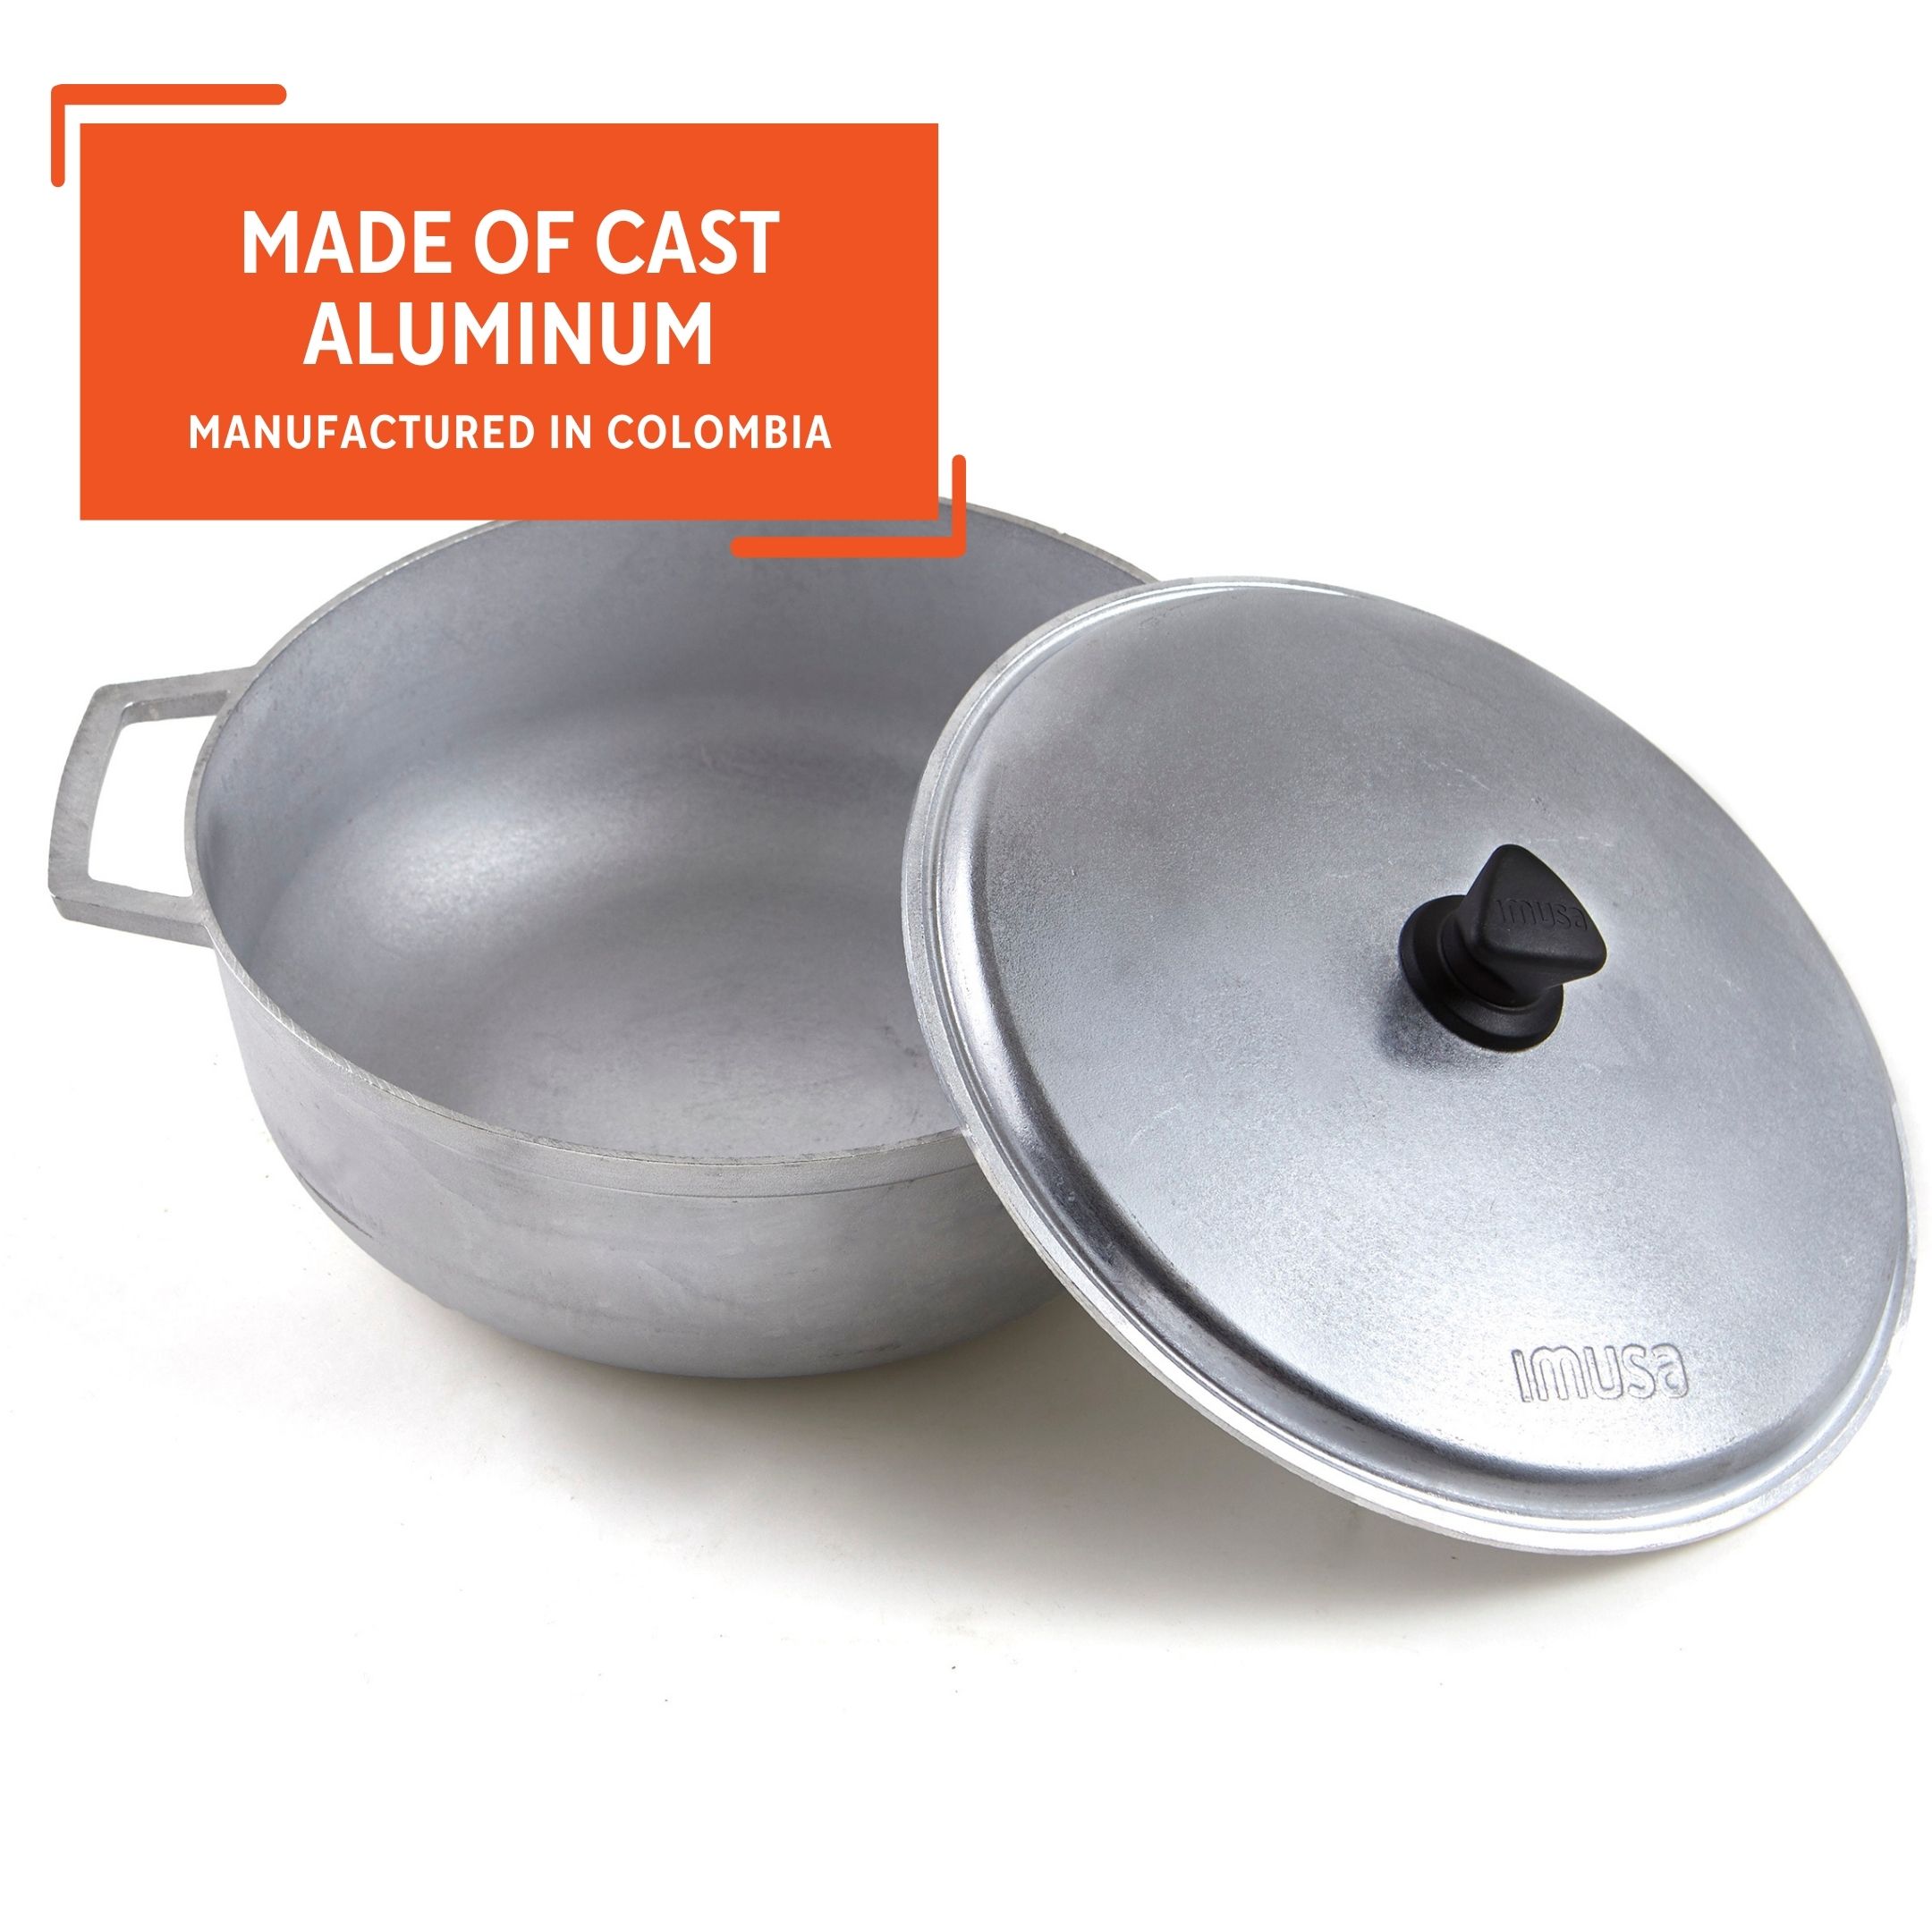 Imusa 11.6 Quart Cast Aluminum Traditional Colombian Caldero or Dutch Oven with Lid - image 5 of 12